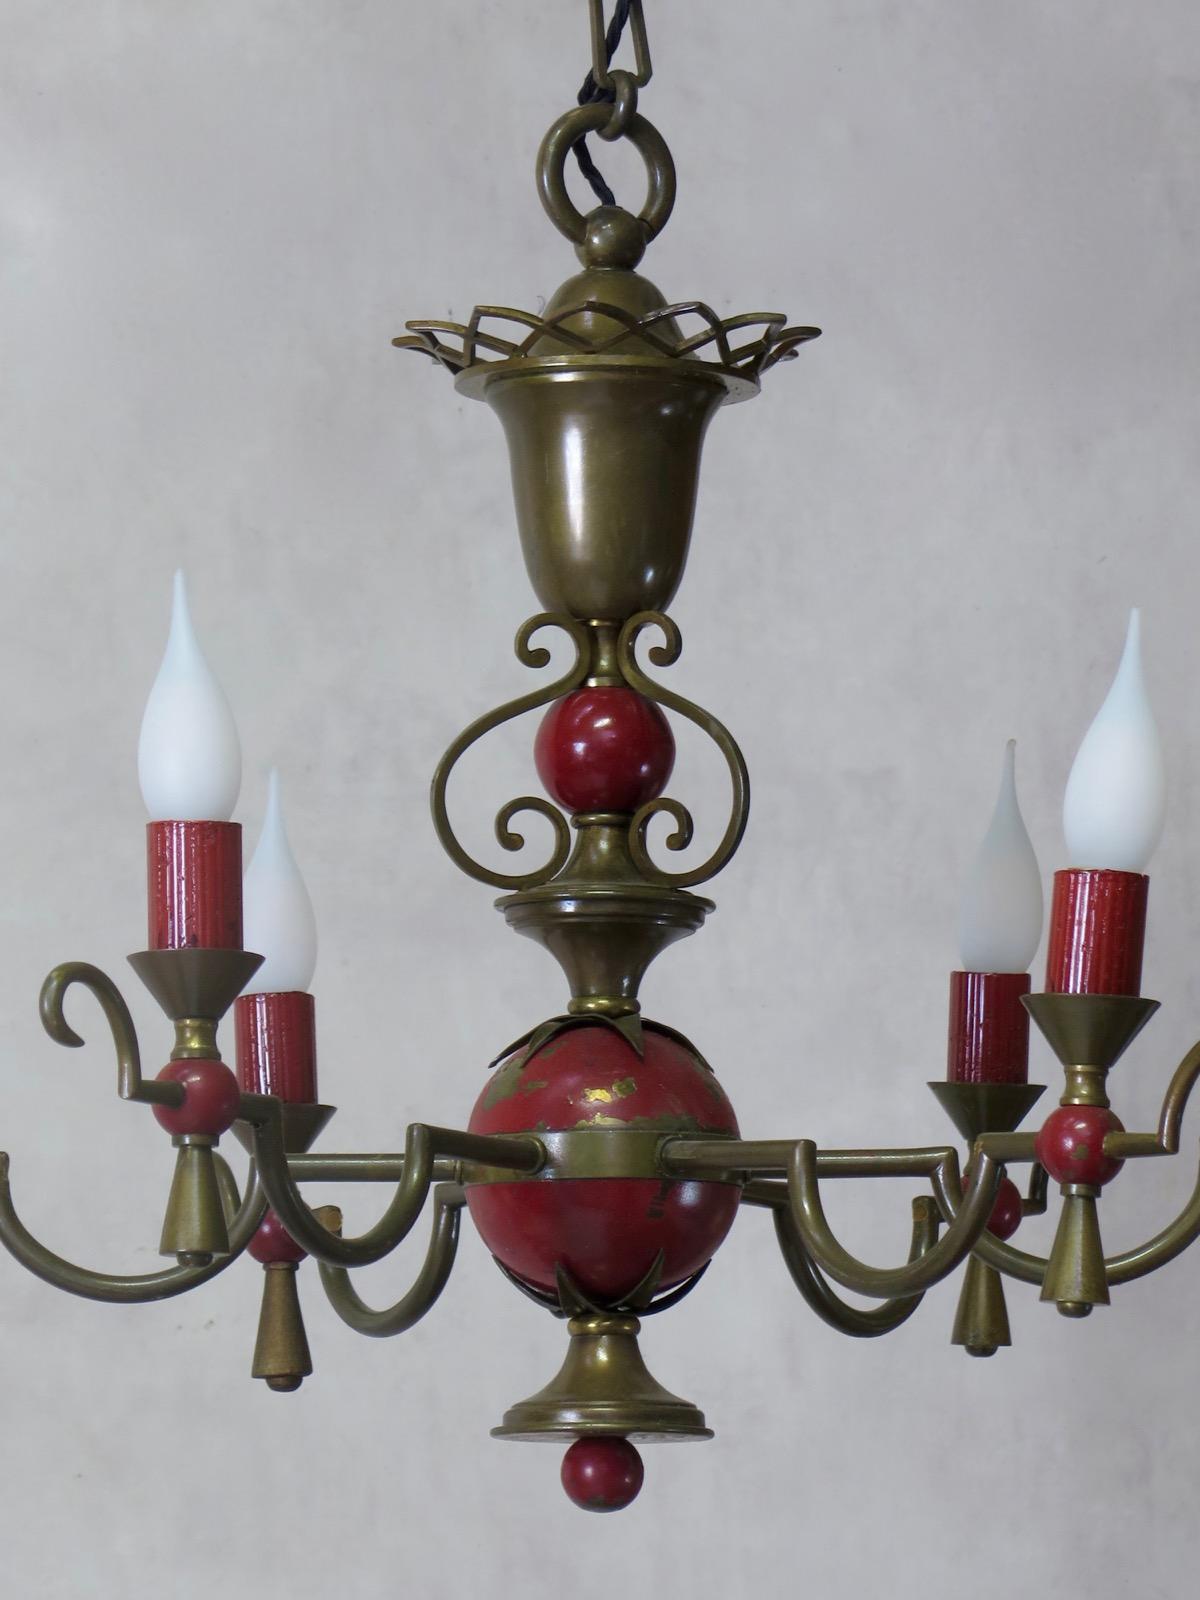 Chic brass and red-painted tole chandelier, with six lights. 

Height indicated below is without the chain. With the chain, the total height is 120cm (47.24 inches).